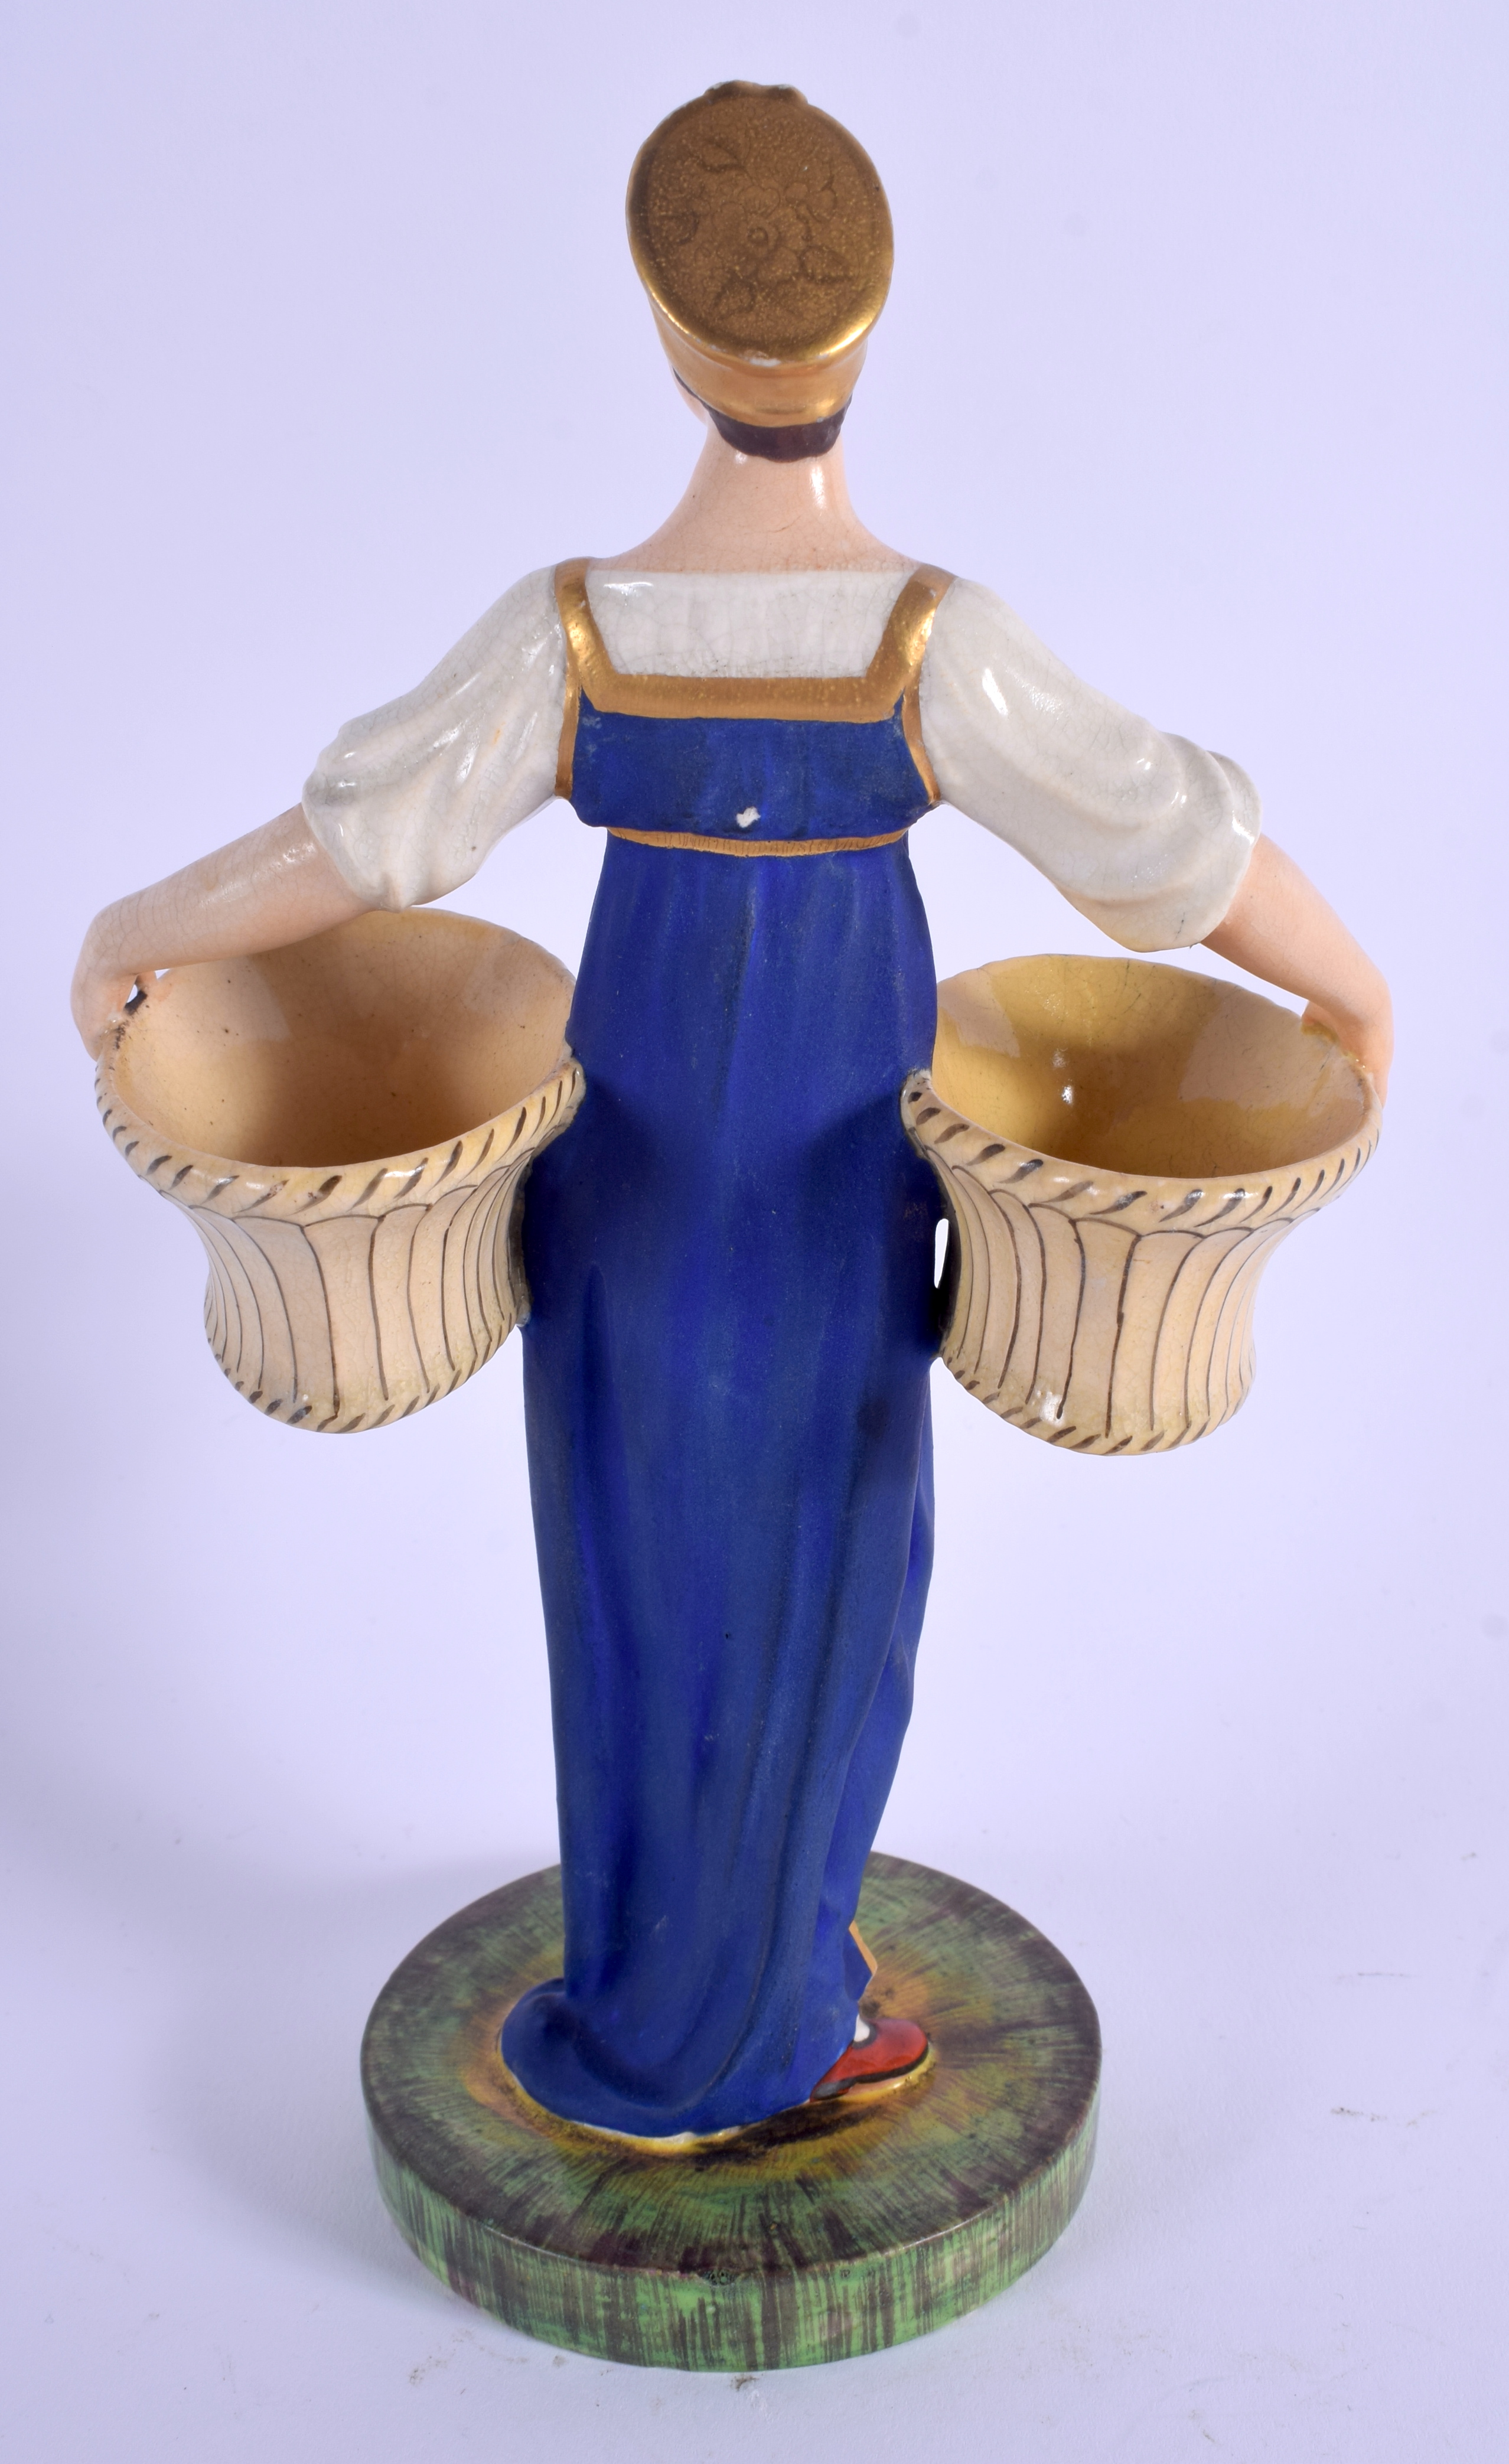 A VERY RARE EARLY 19TH CENTURY RUSSIAN PORCELAIN FIGURE OF A WOMEN probably Gardner Factory, Verbilk - Image 4 of 10